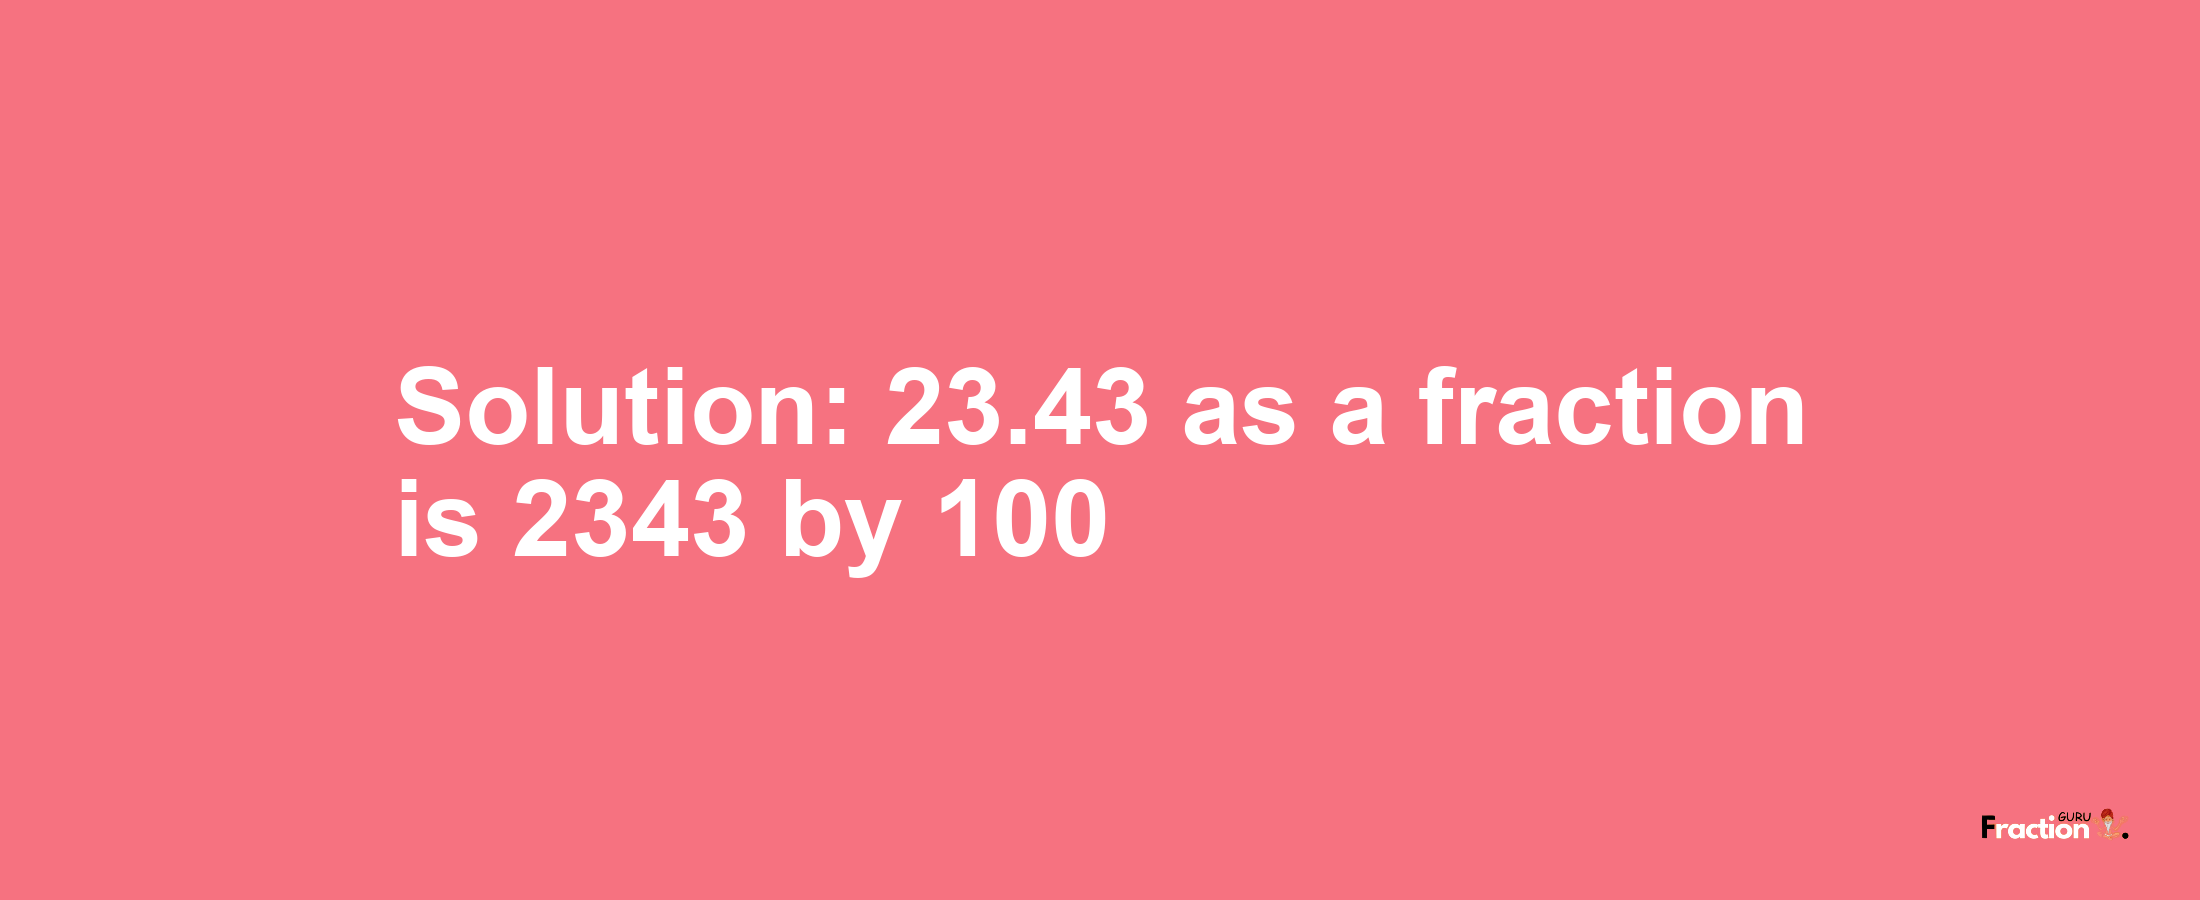 Solution:23.43 as a fraction is 2343/100